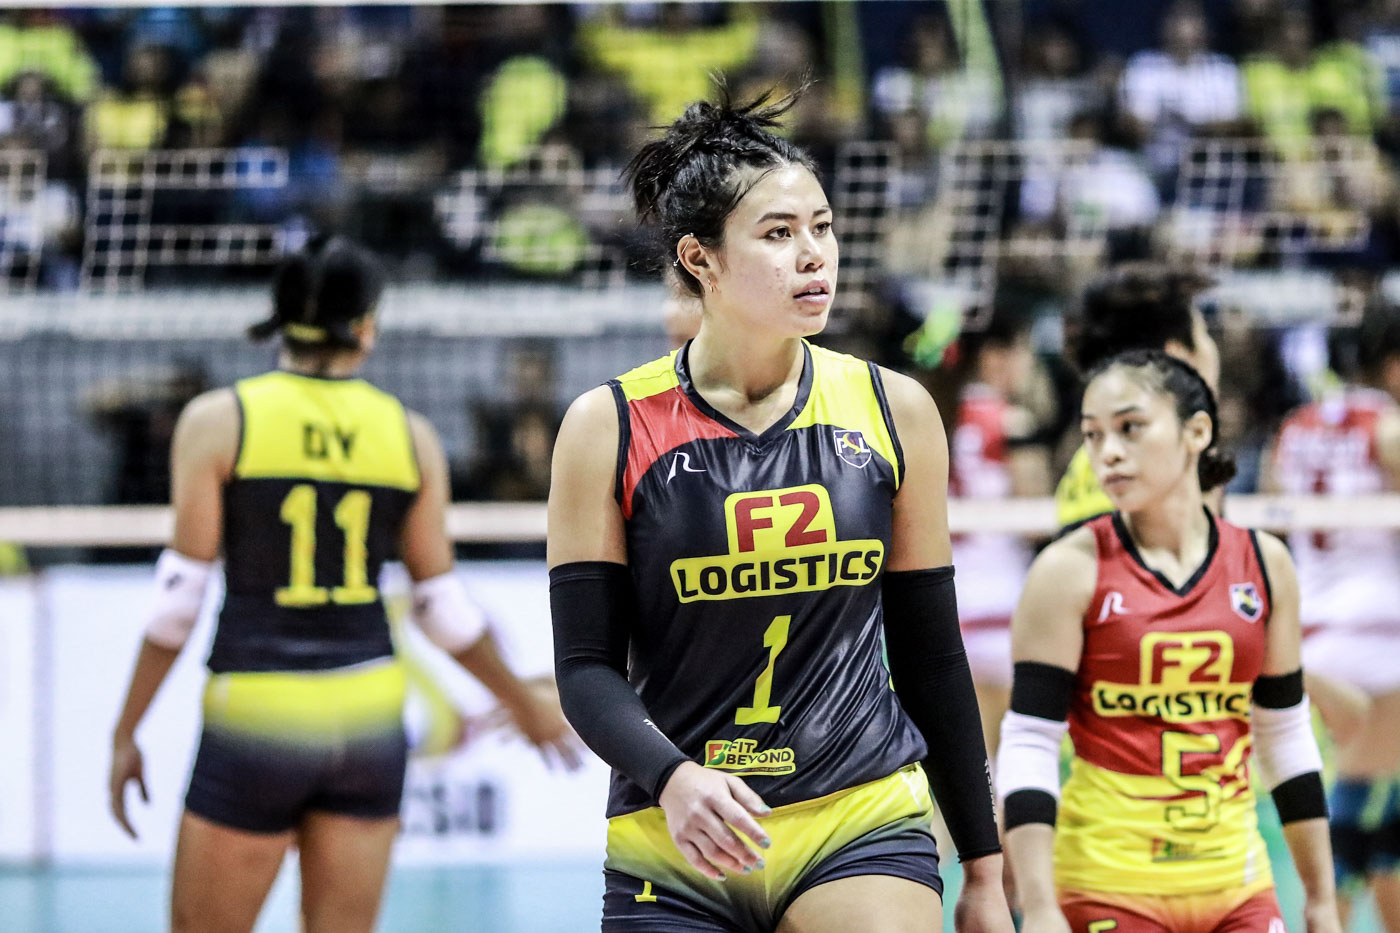 KEY PLAYER. Kalei Mau remains to be one of the players to watch out for in F2 Logistics. Photo by Michael Gatpandan/Rappler 